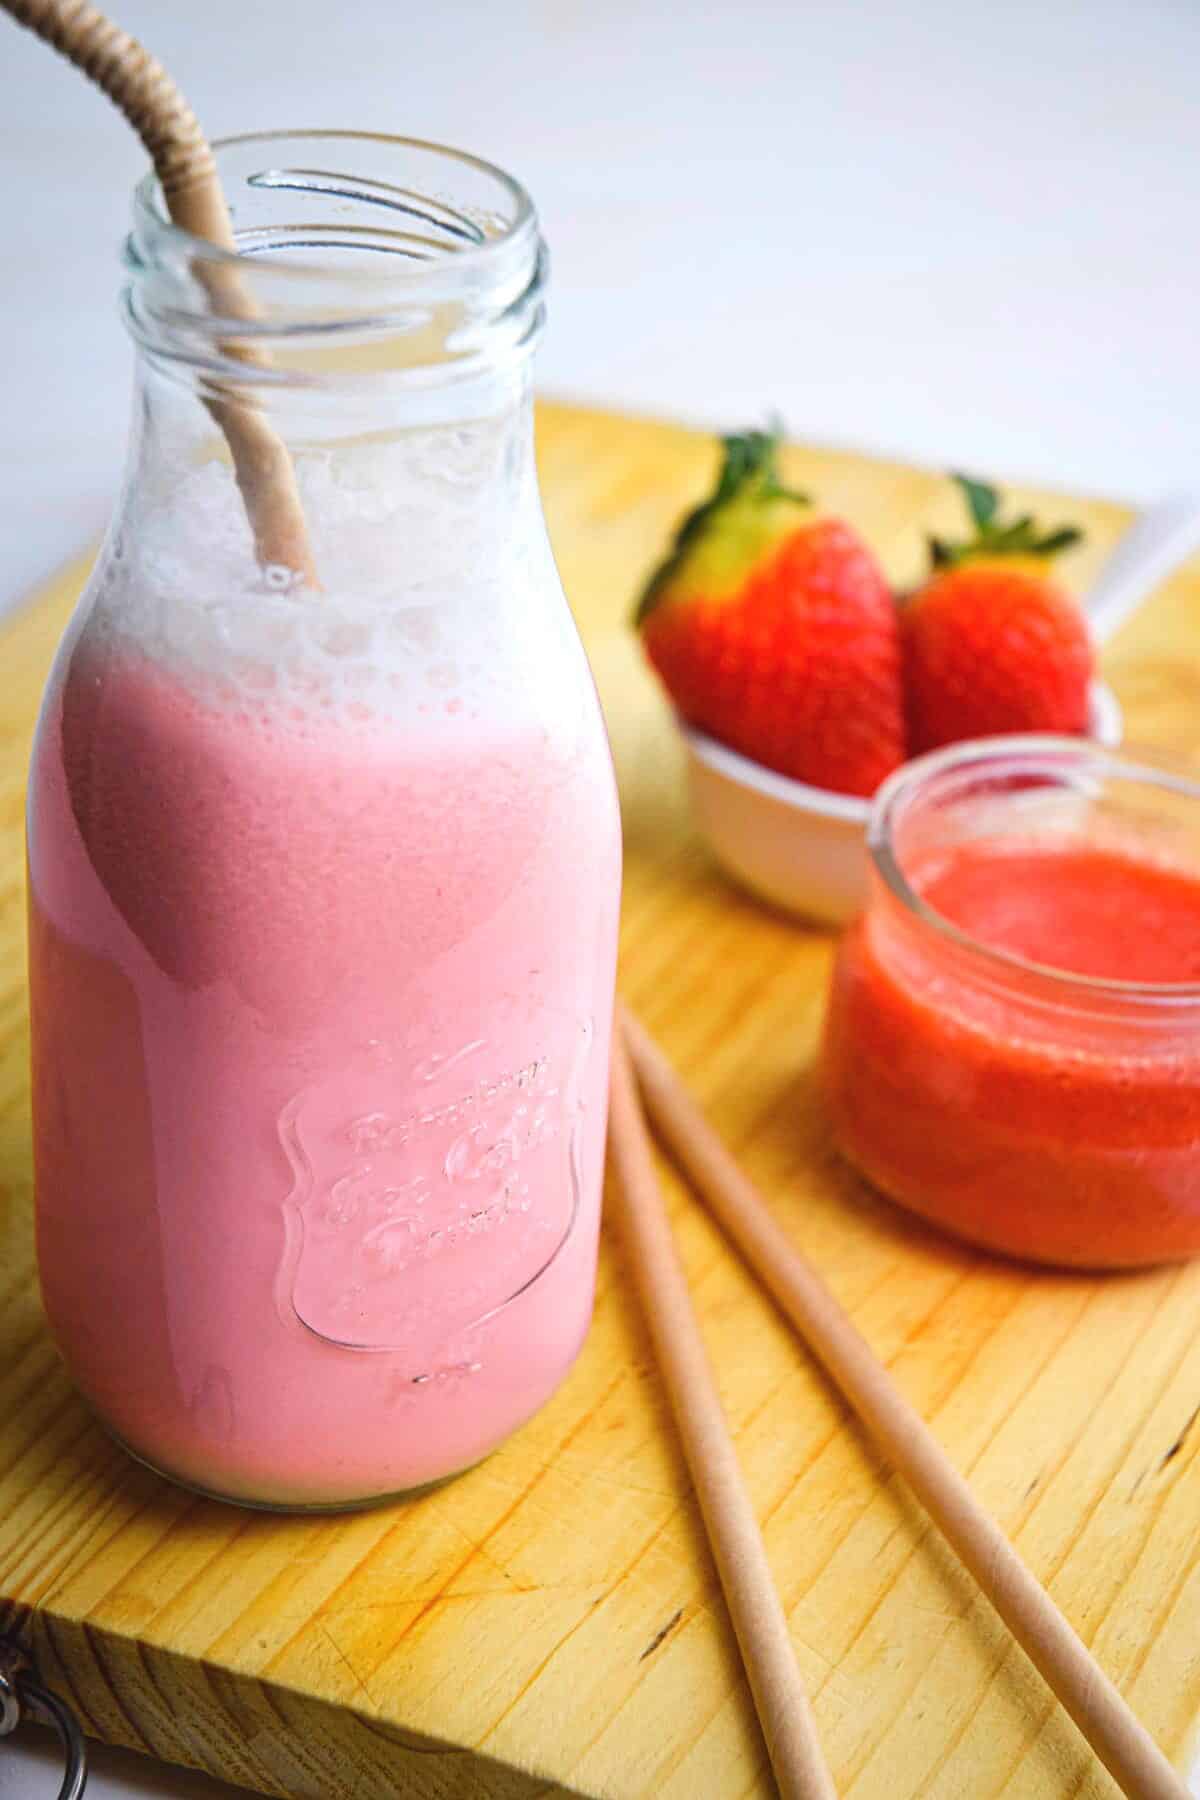 Strawberry Milk in a glass jar with a straw on a wooden board with fresh strawberries and strawberry puree.